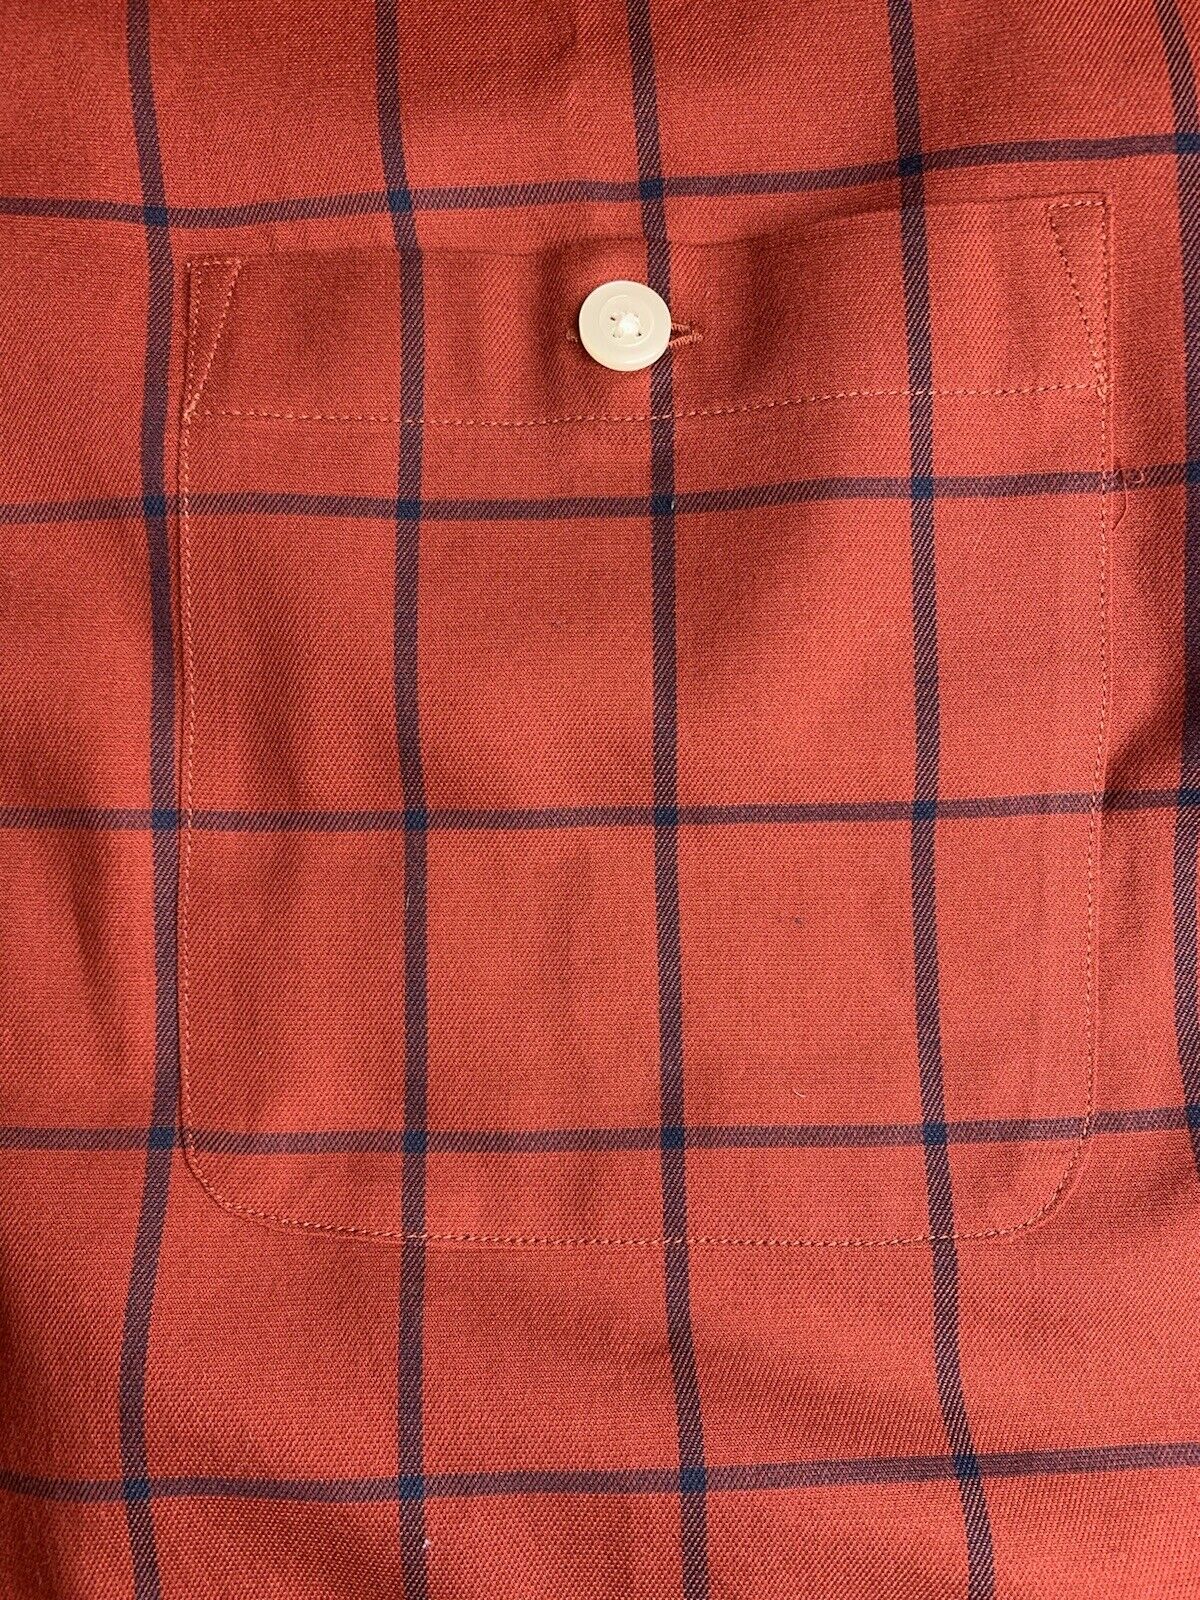 Orvis Long Sleeve Button Up Shirt Dark Red Plaid Classic Fit Wrinkle Free Size L